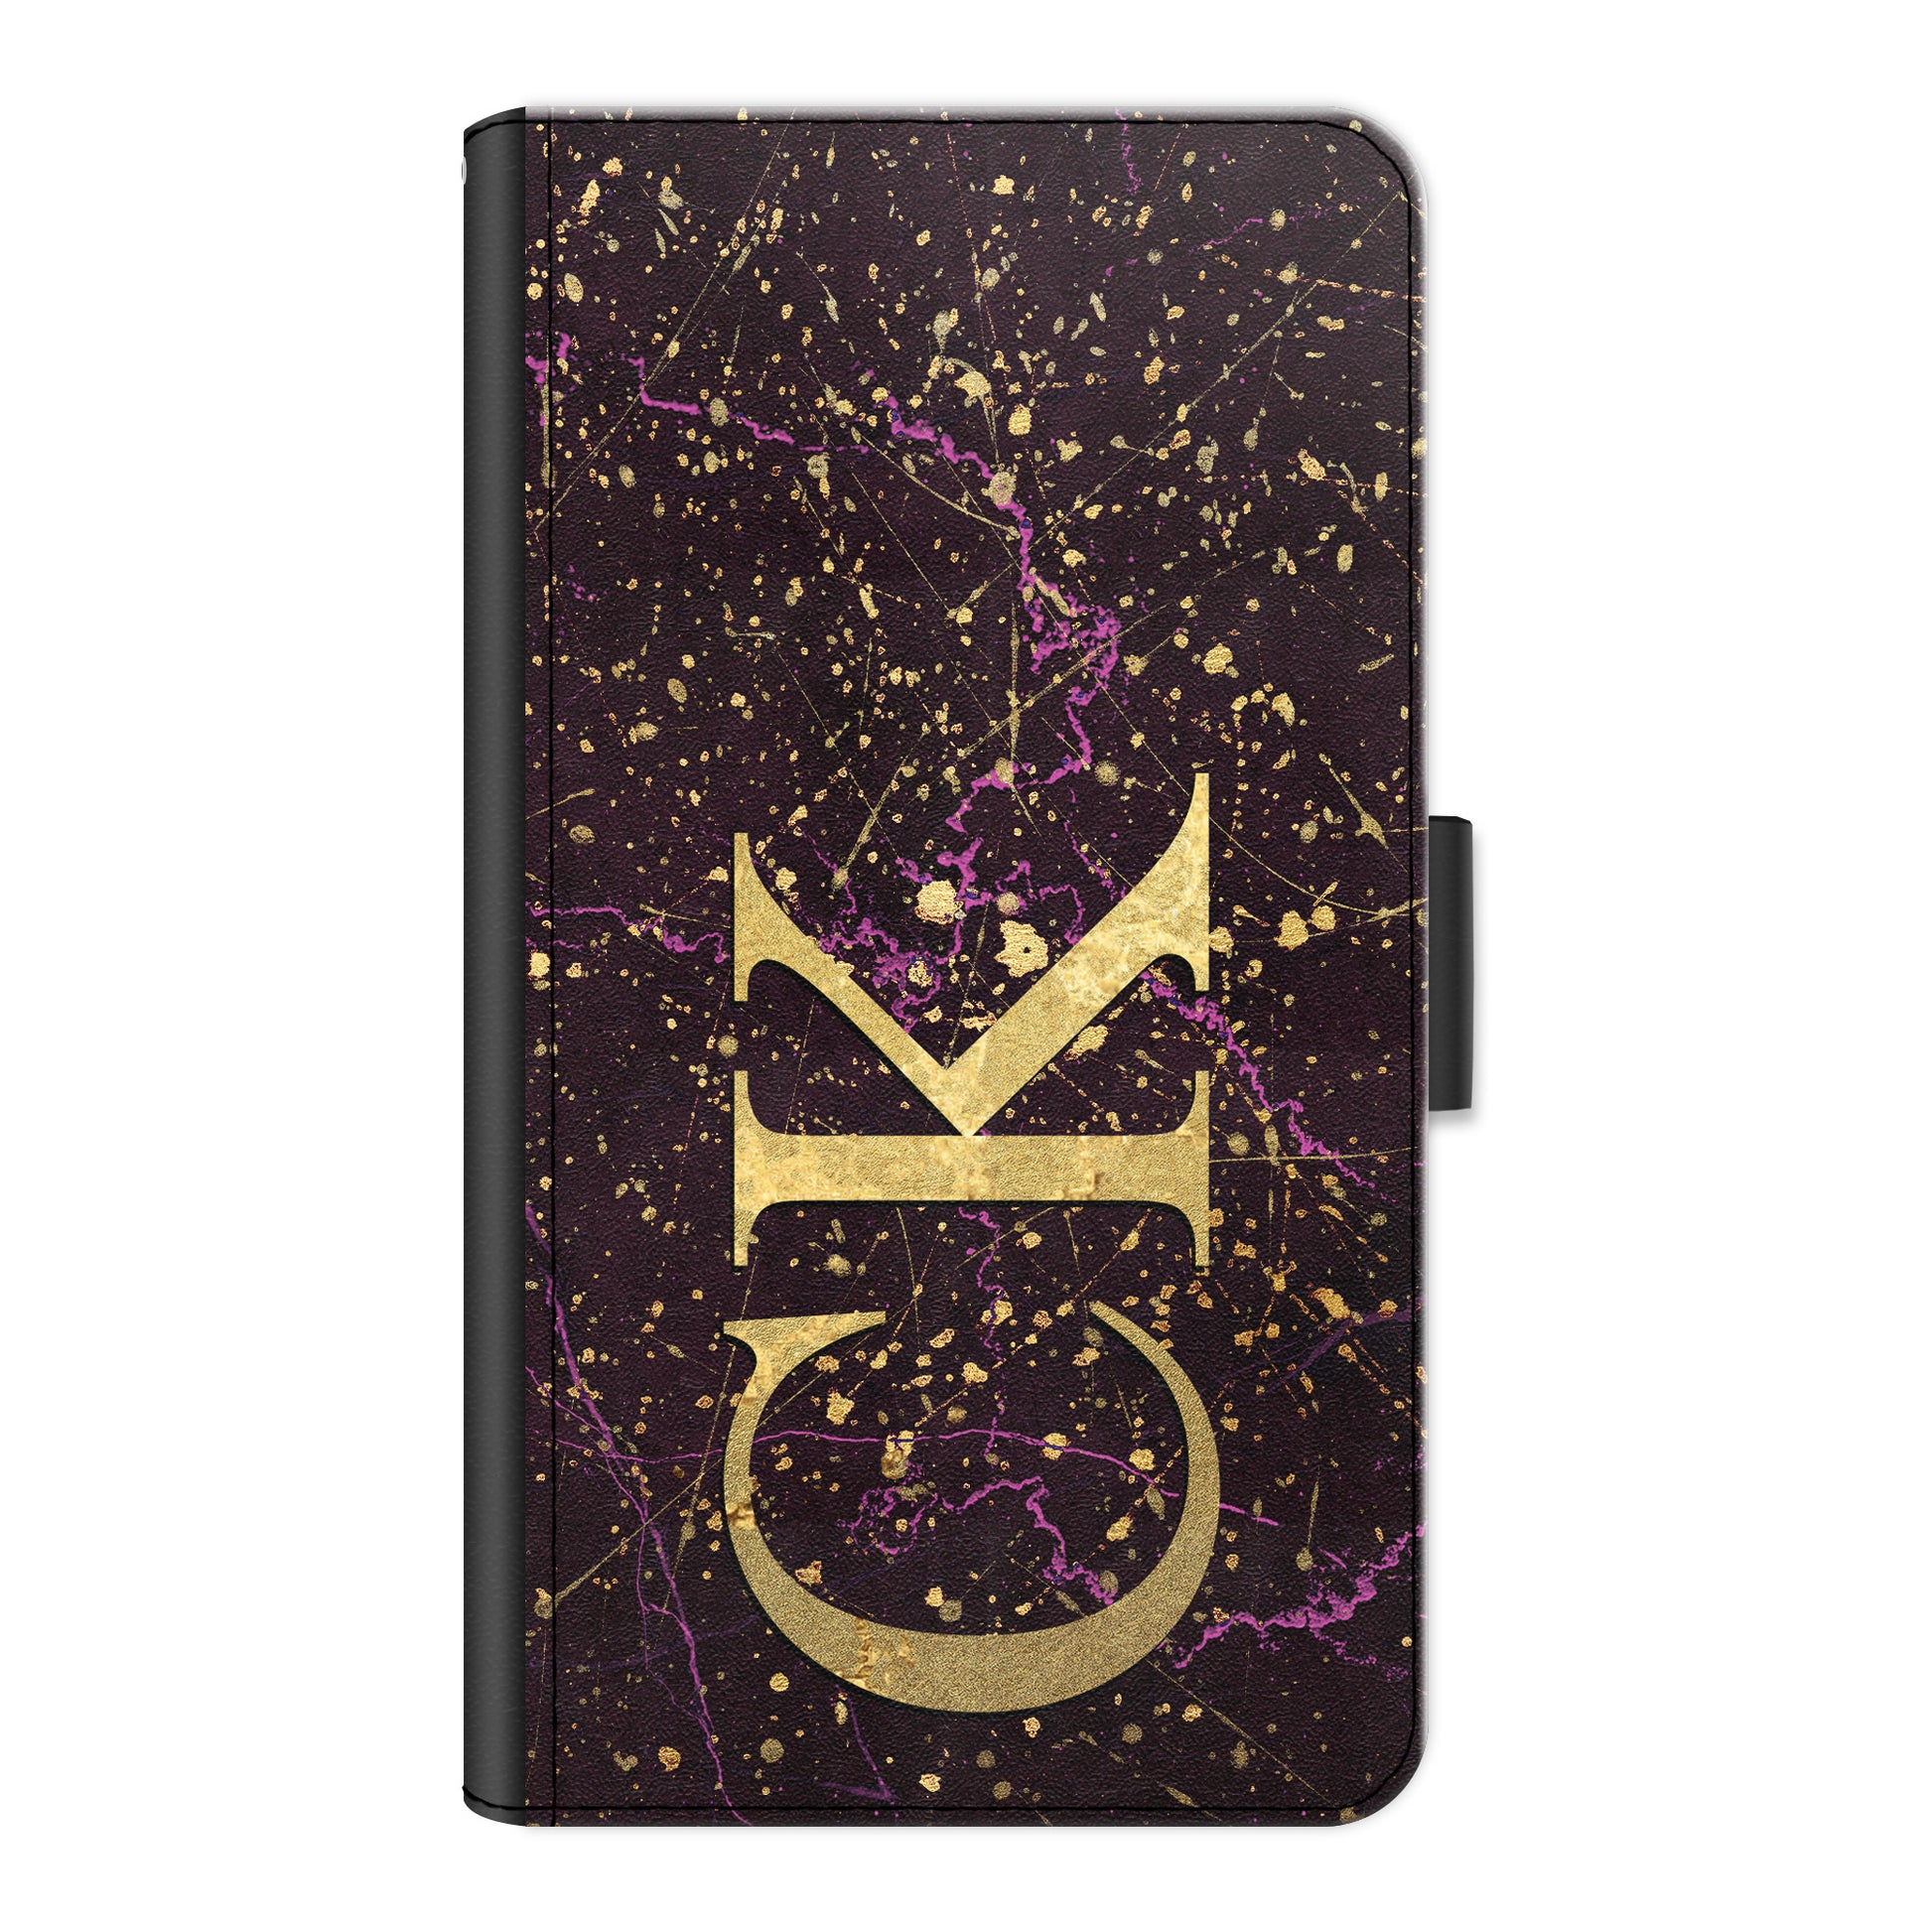 Personalised Apple iPhone Leather Wallet with Gold Initials on Pink and Gold Infused Black Marble